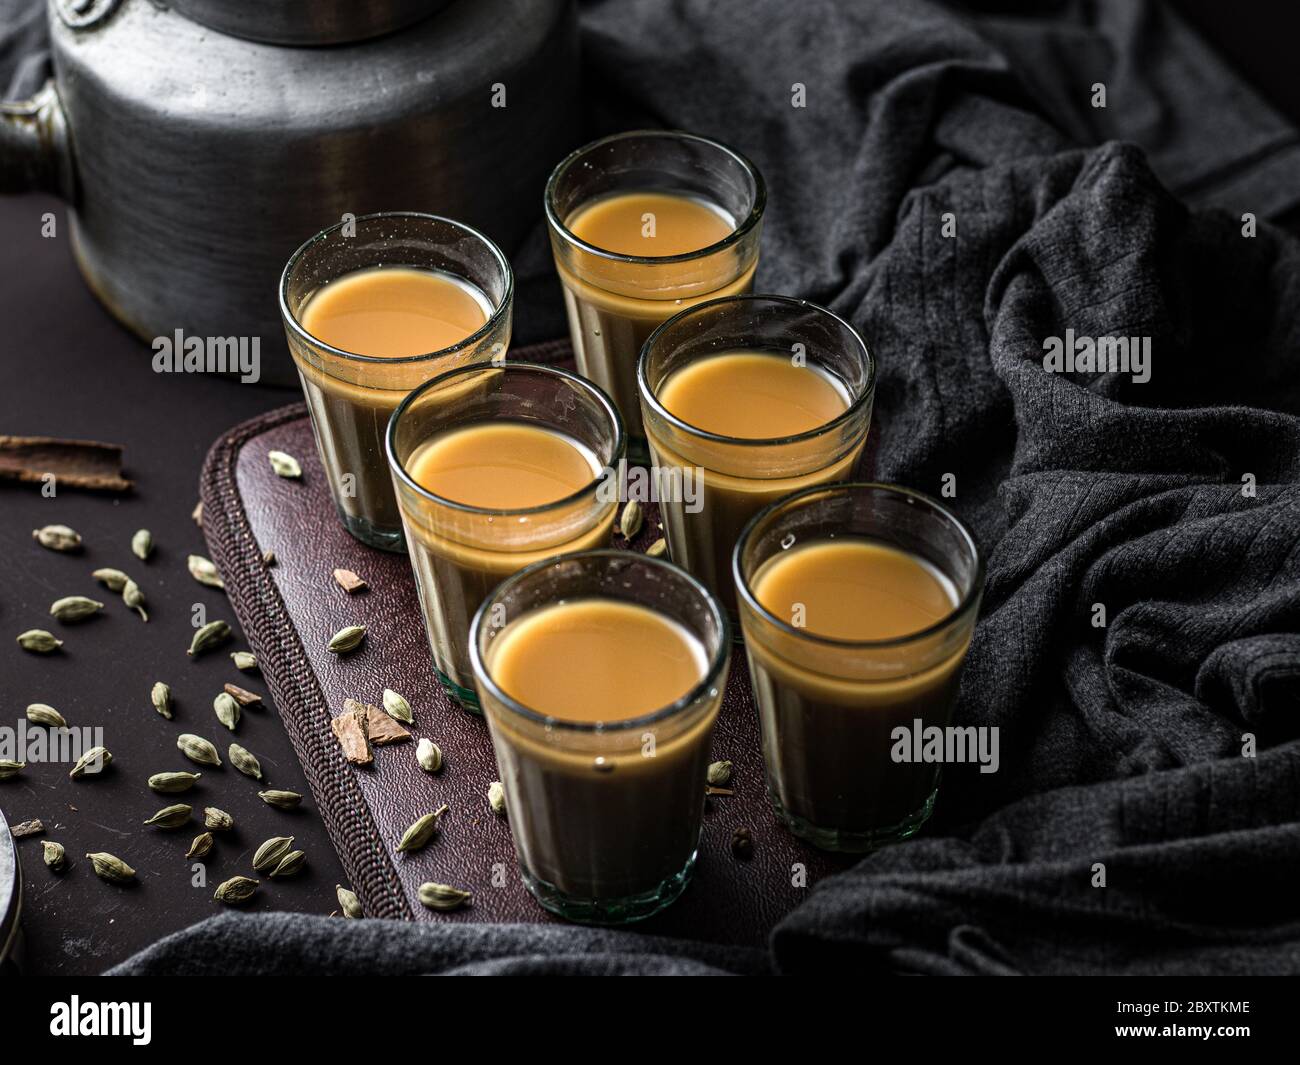 https://c8.alamy.com/comp/2BXTKME/indian-chai-in-glass-cups-with-metal-kettle-and-other-masalas-to-make-the-tea-2BXTKME.jpg